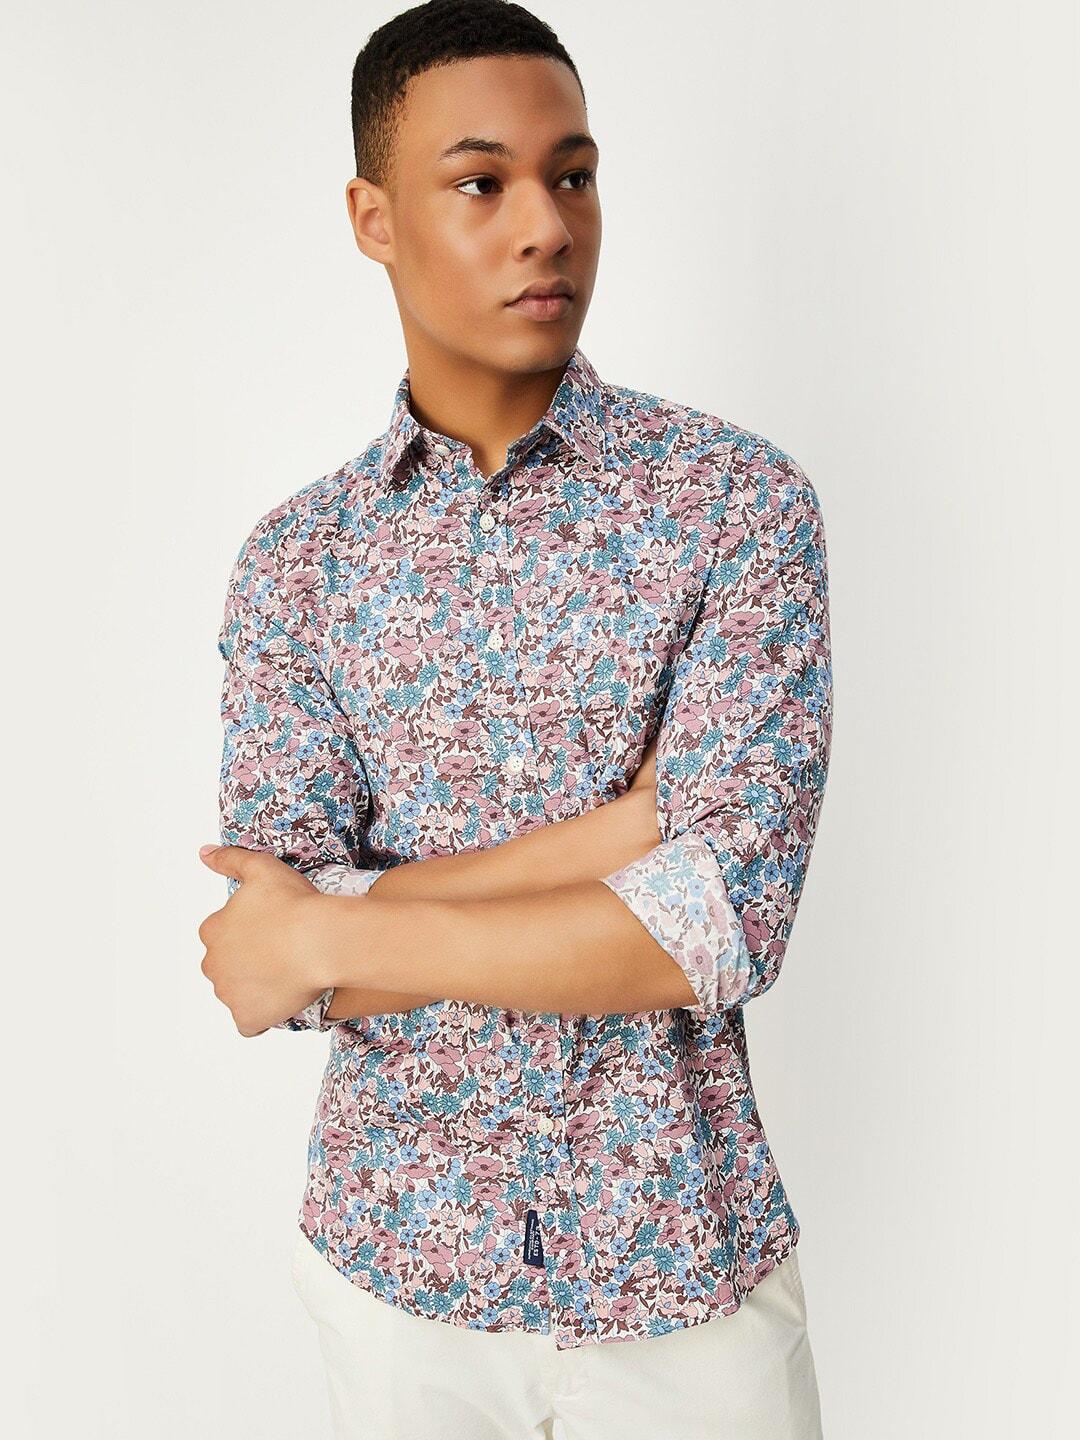 max-floral-opaque-printed-pure-cotton-casual-shirt